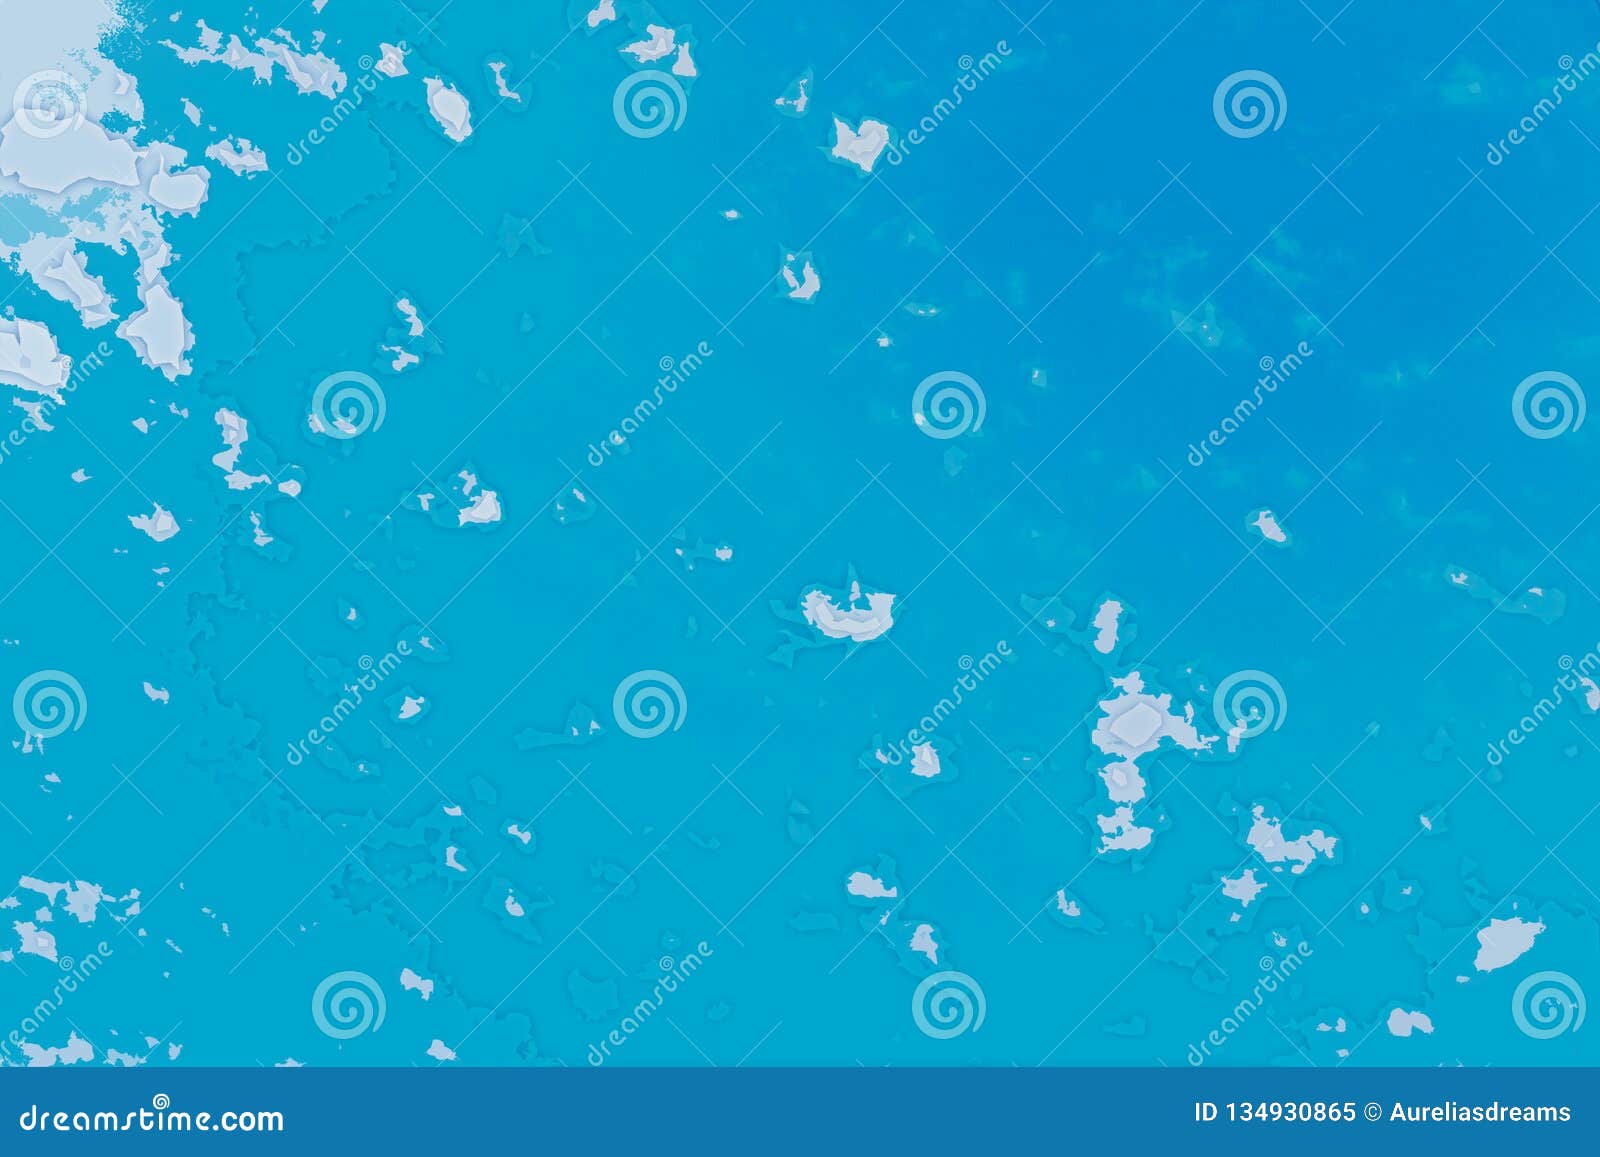 White, Blue and Cyan Background Texture. Abstract Map with North ...